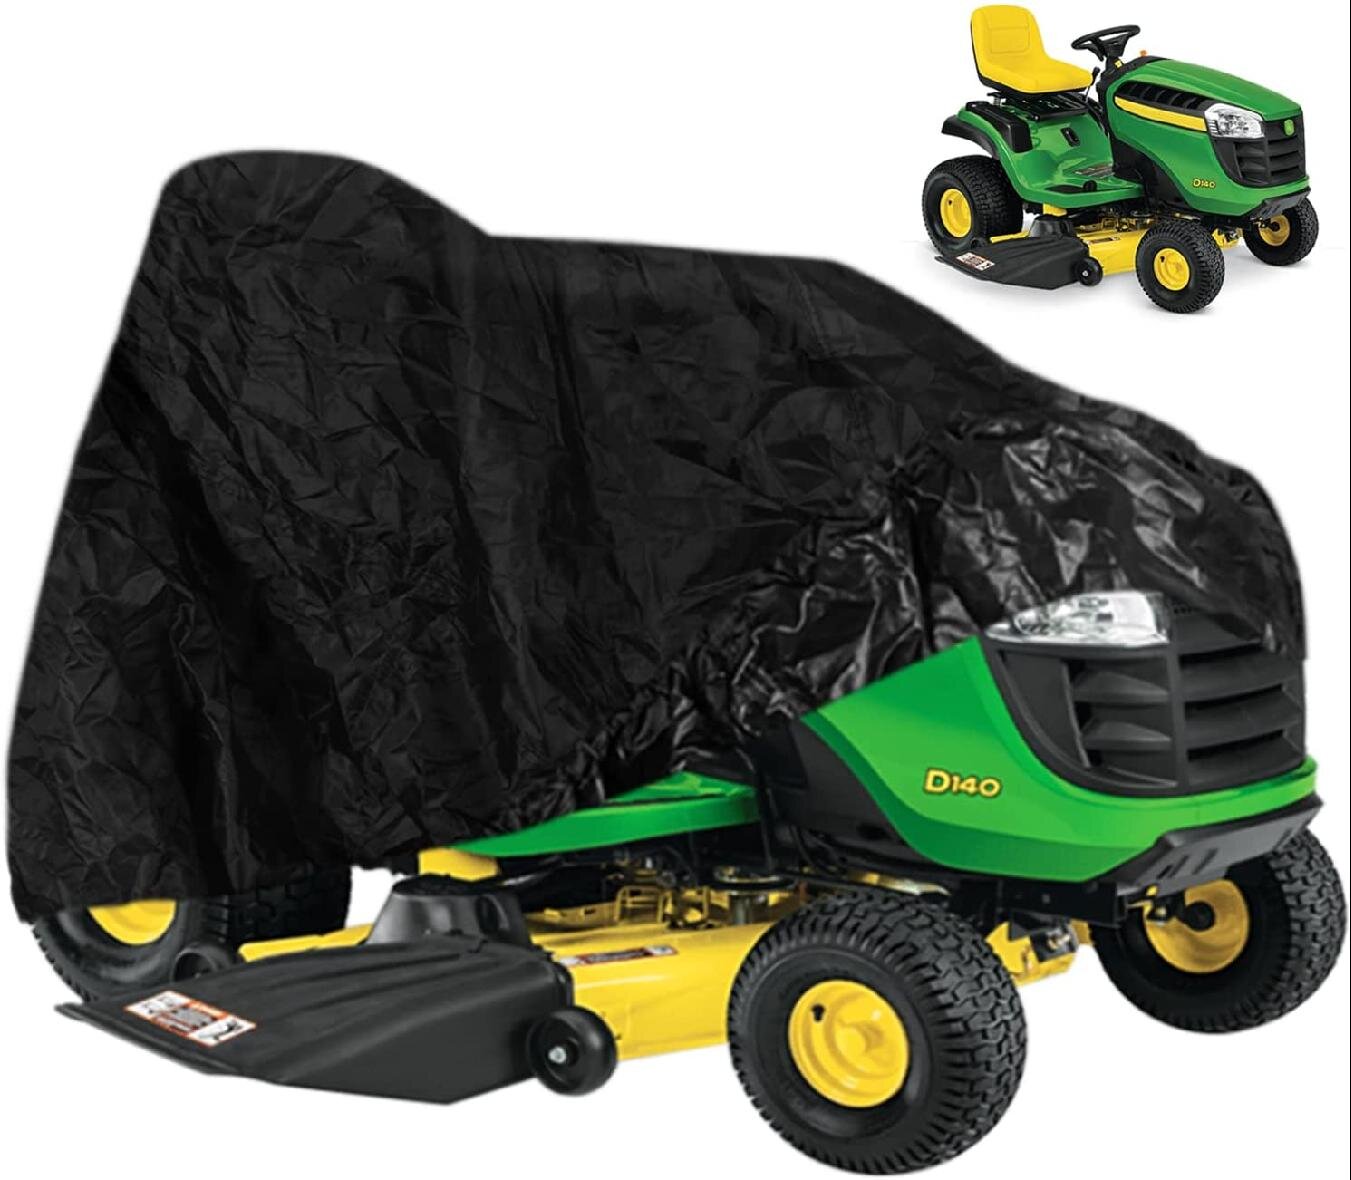 Large Premium Lawn Tractor Cover Riding Lawn Mower Waterproof Protective Tool 